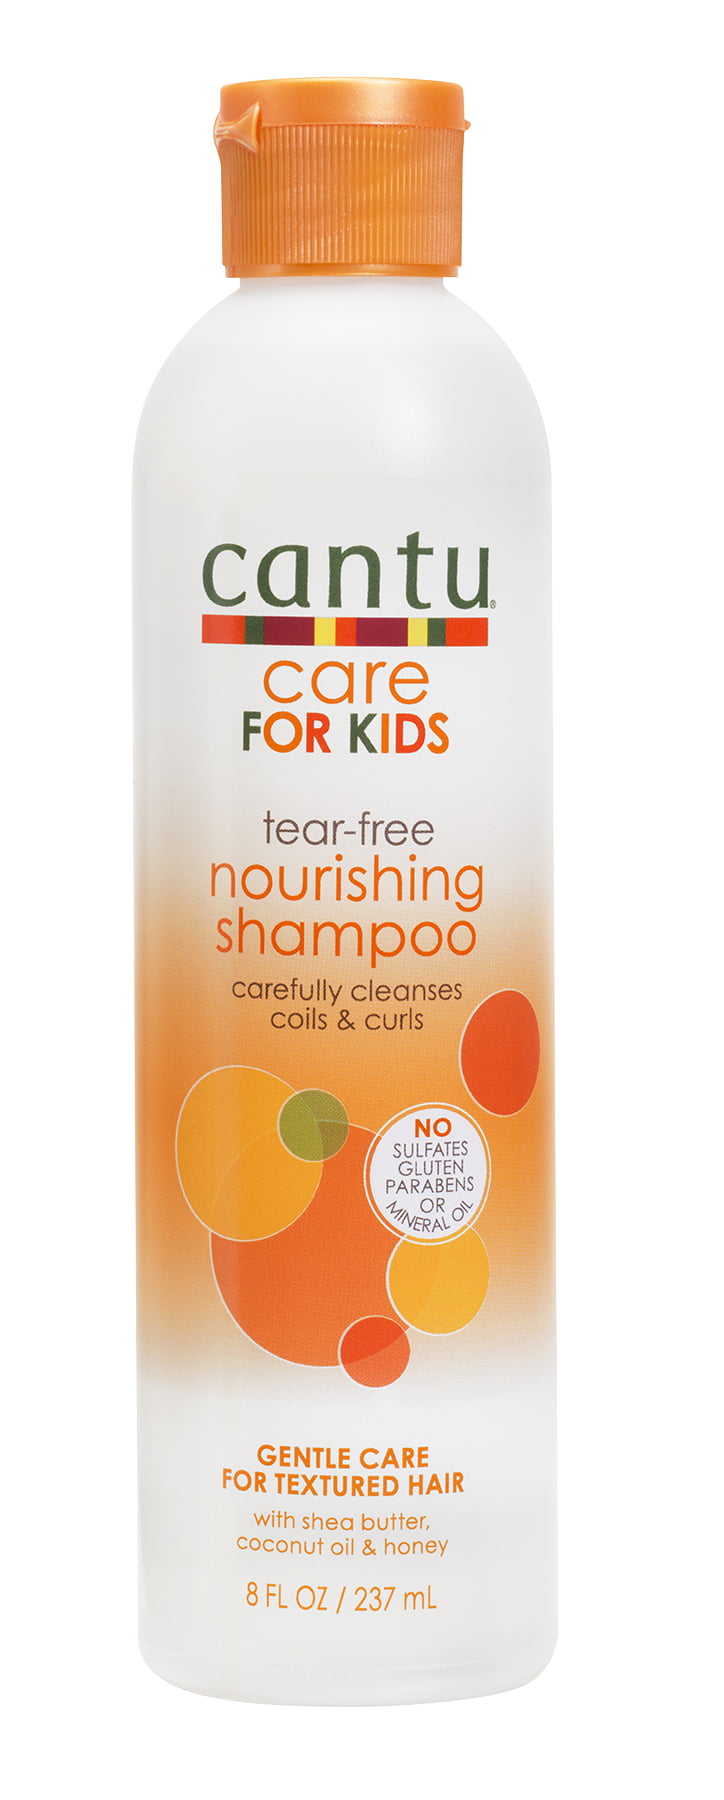 Cantu Care for Kids Nourishing Shampoo with Shea Butter, Coconut Oil, and Honey, 8 oz.